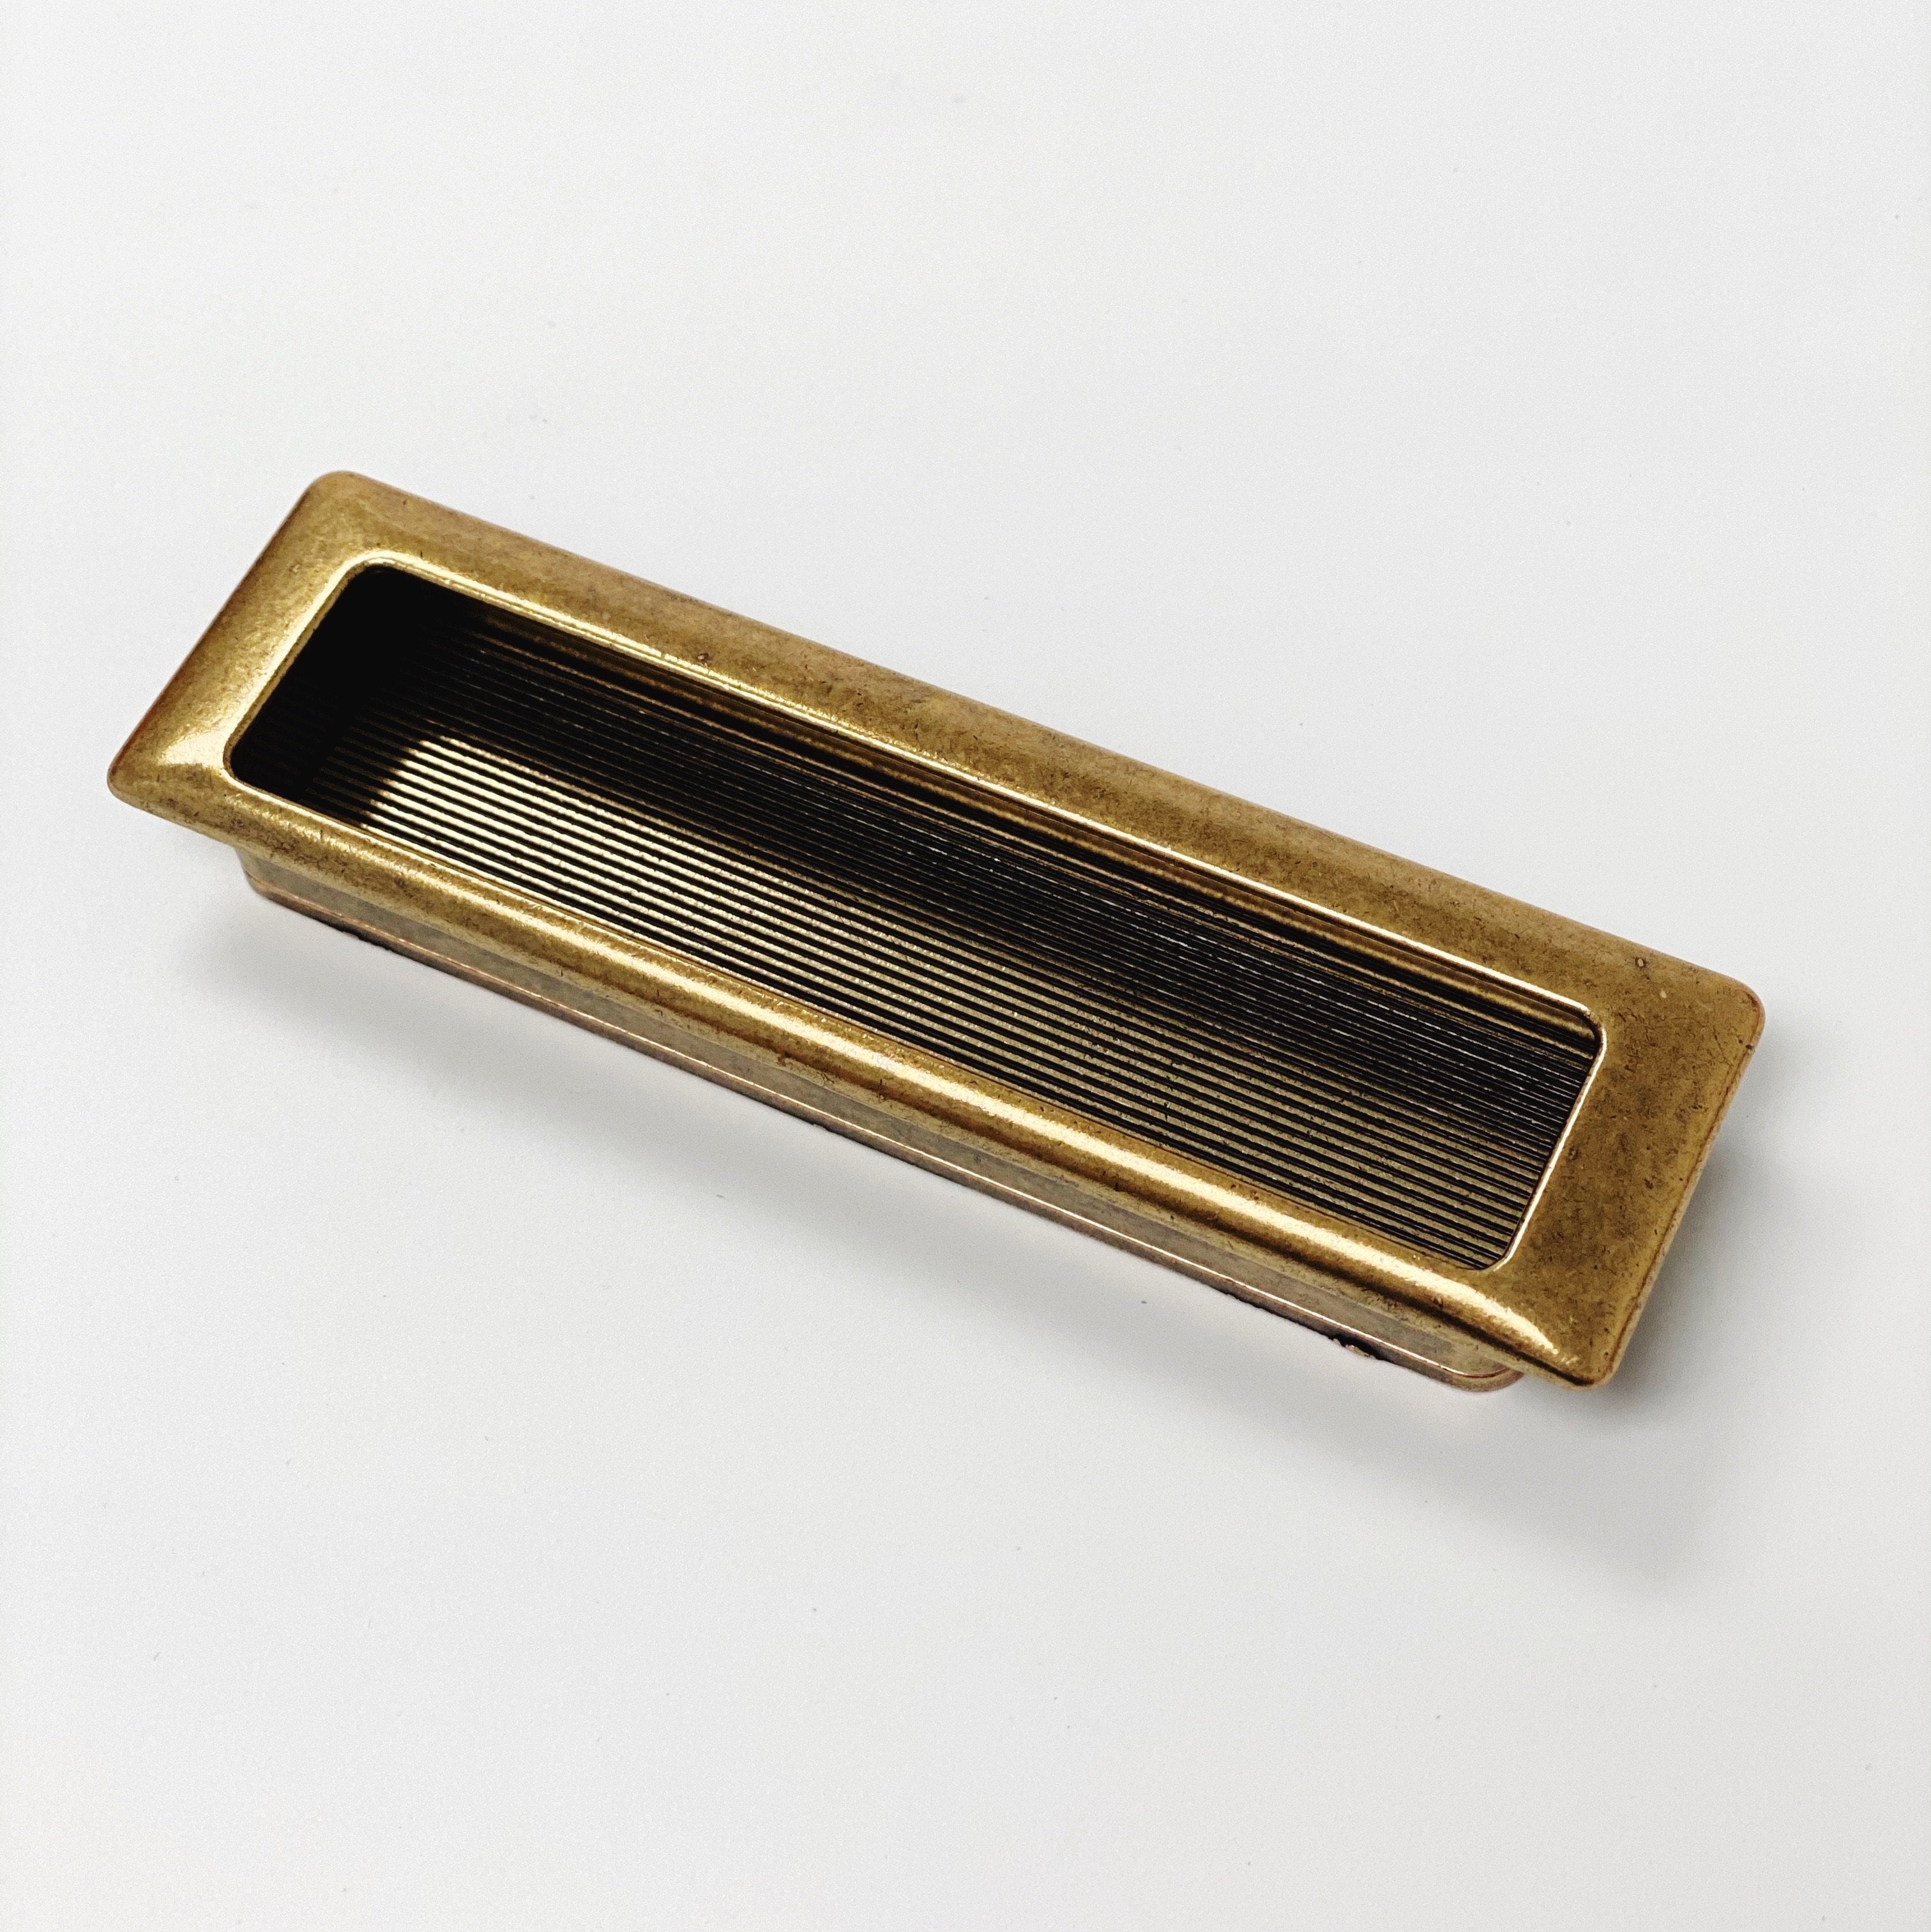 Recessed Large Antique Brass Drawer Pulls - Closet Door and Drawer Handle | Pulls